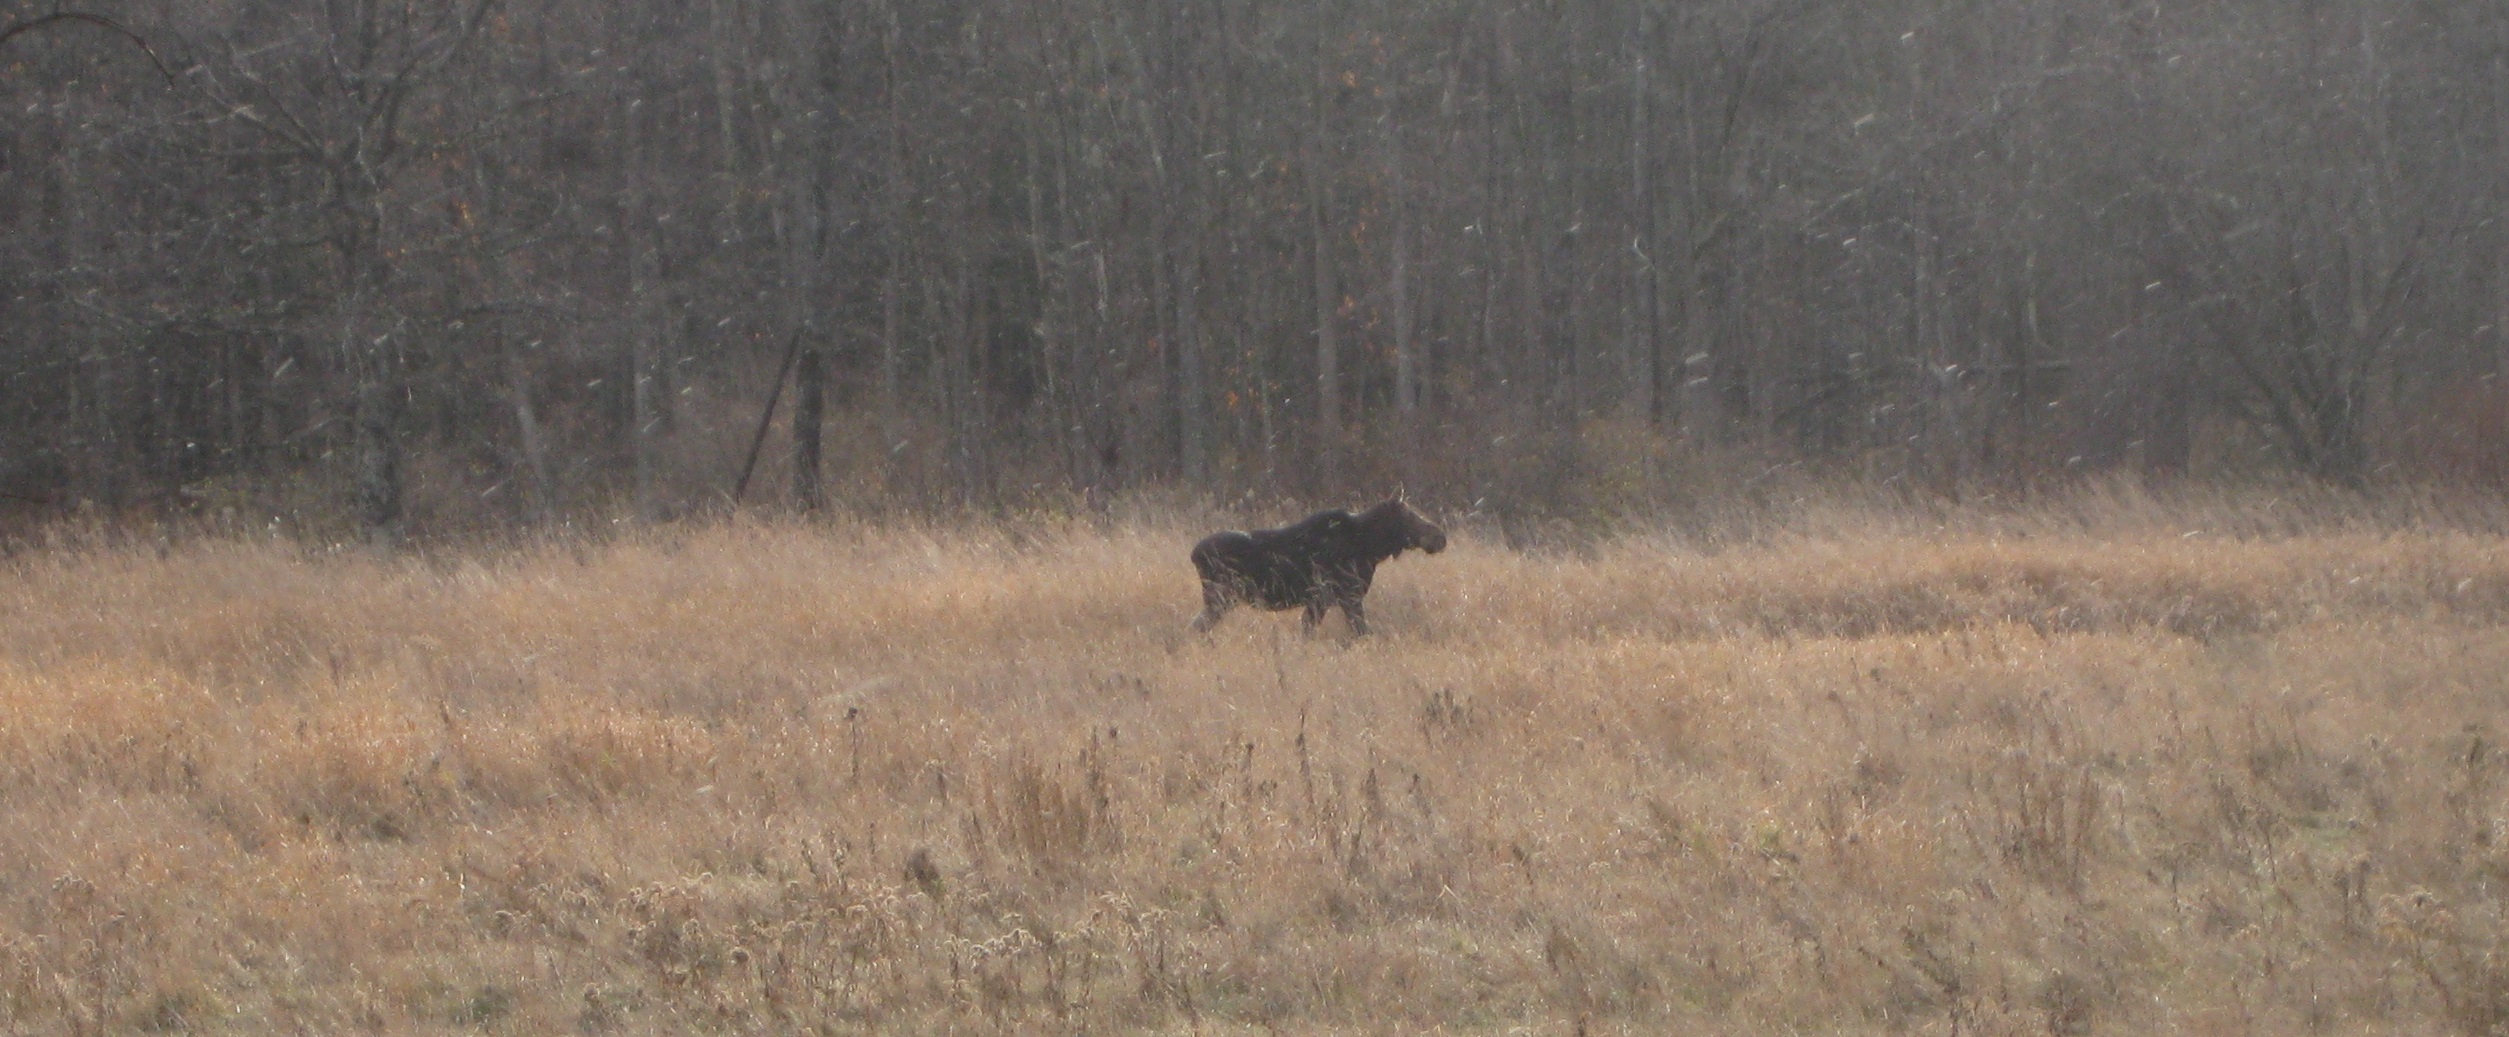 Moose standing in the field at Mink Brook Community Forest